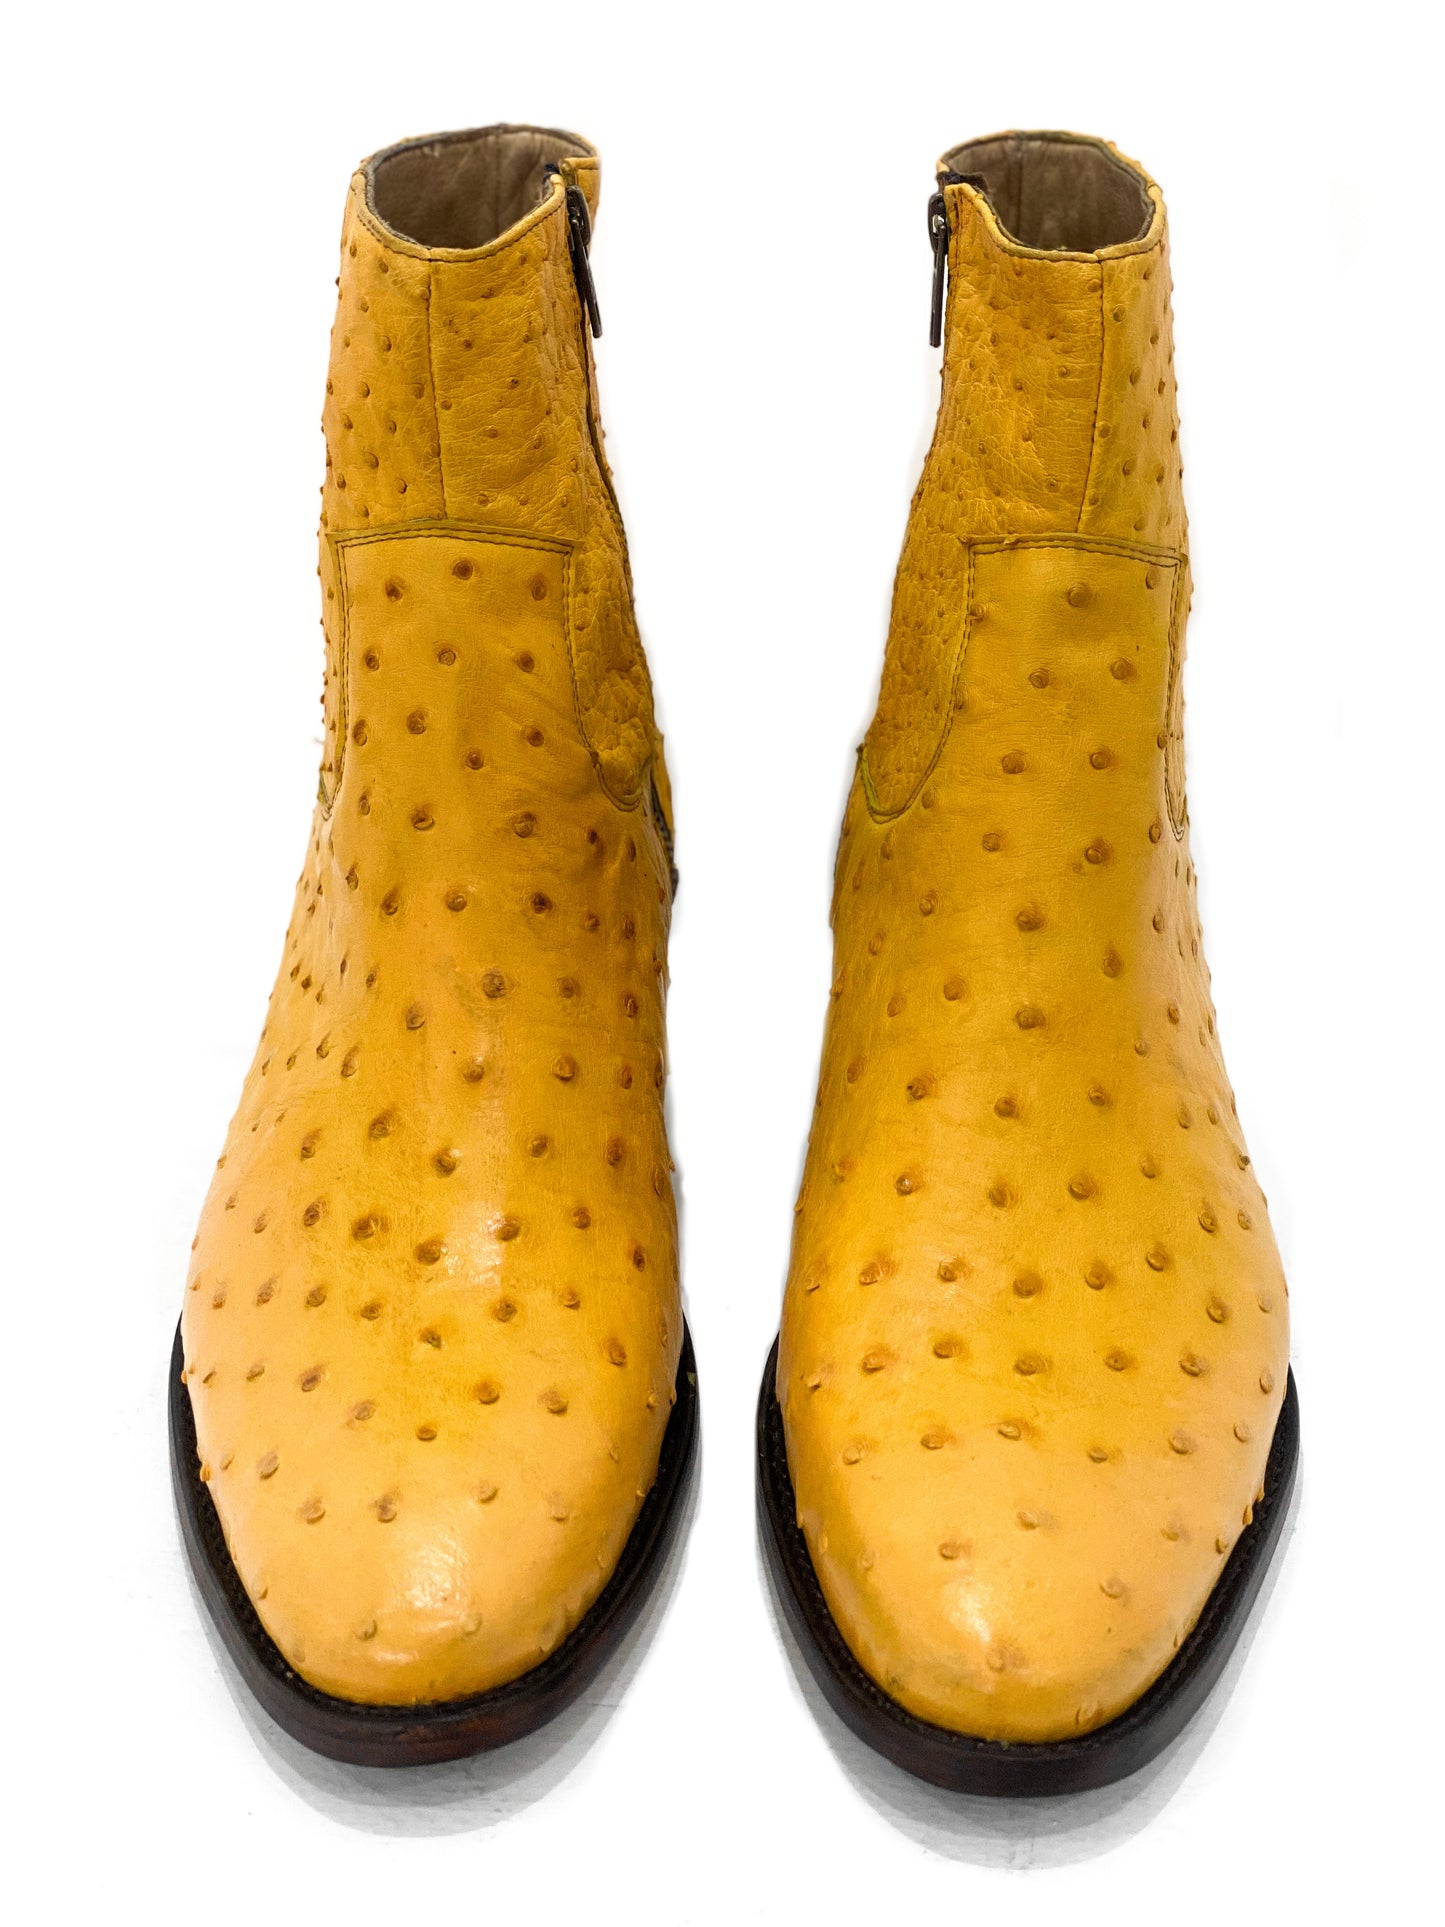 YELLOW OSTRICH BOOTS